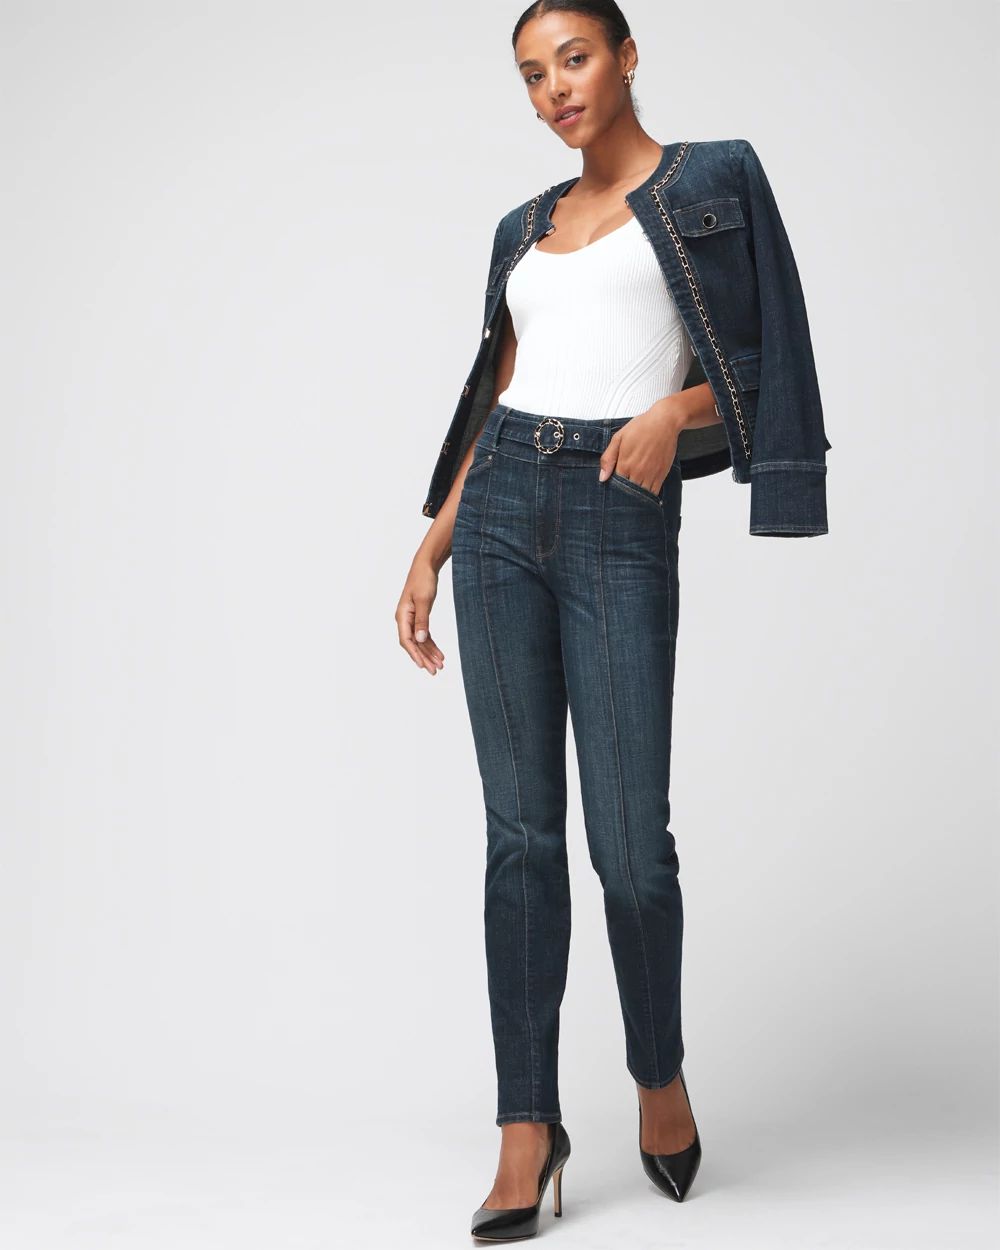 Extra High Rise Everyday Soft Novelty Belt Straight Leg Jeans click to view larger image.